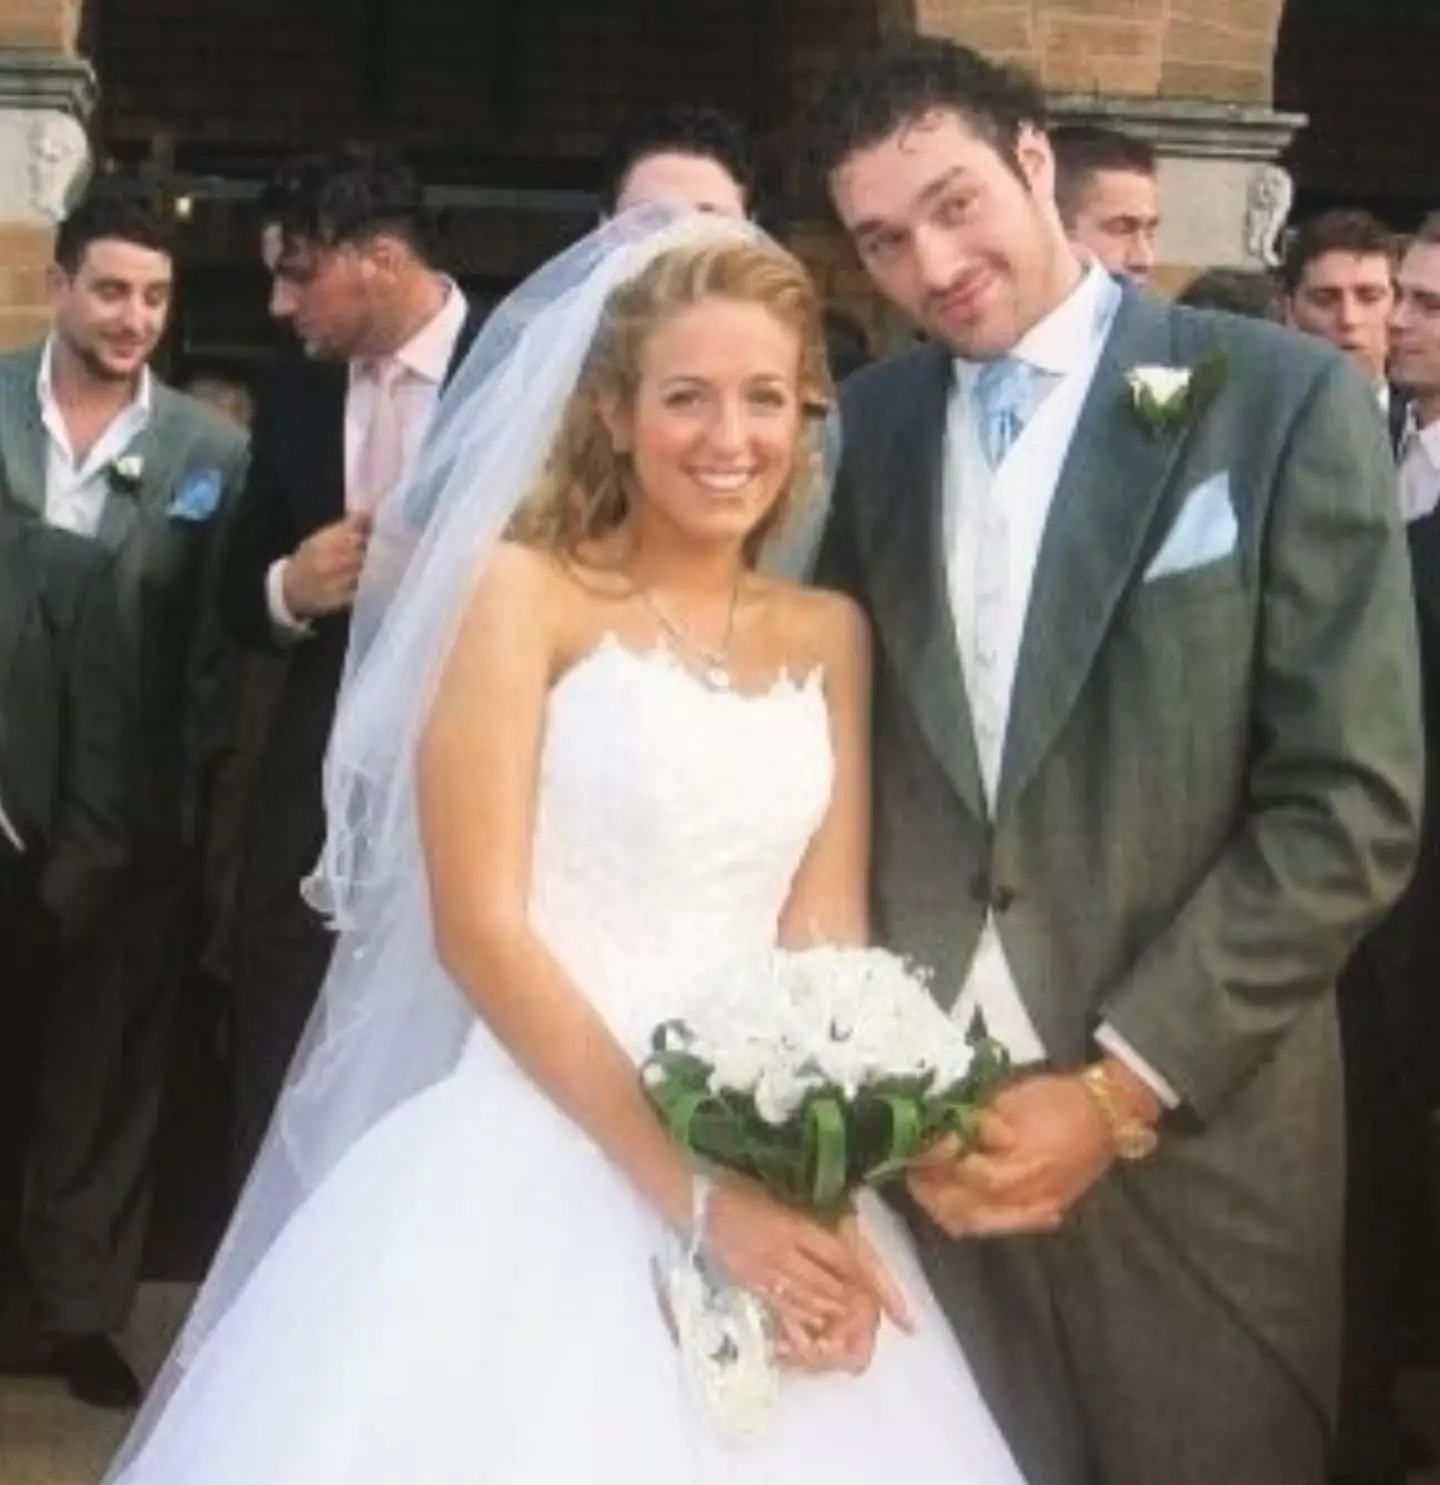 Paris and Tyson Fury tied the knot in 2008.